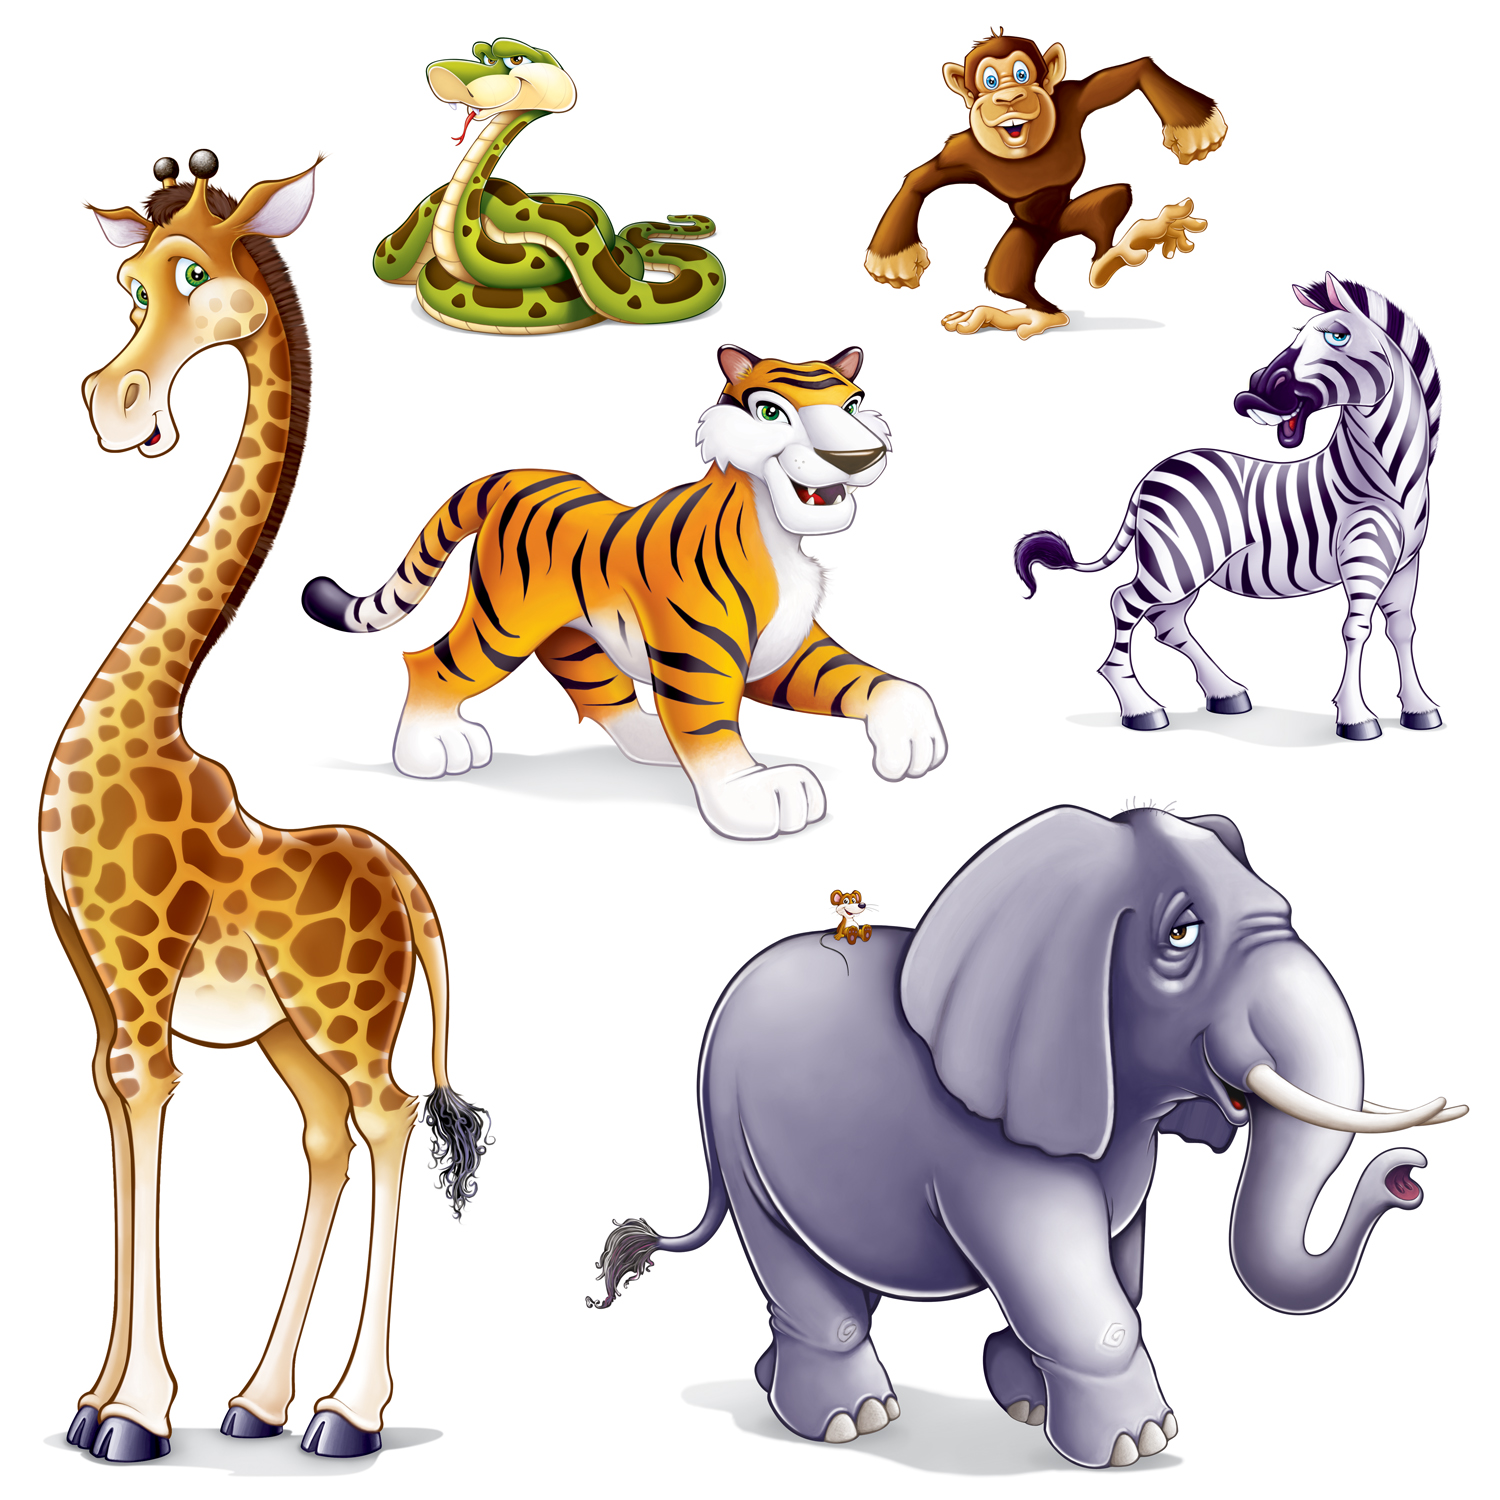 Baby Jungle Animals Clipart | Clipart Panda - Free Clipart Images